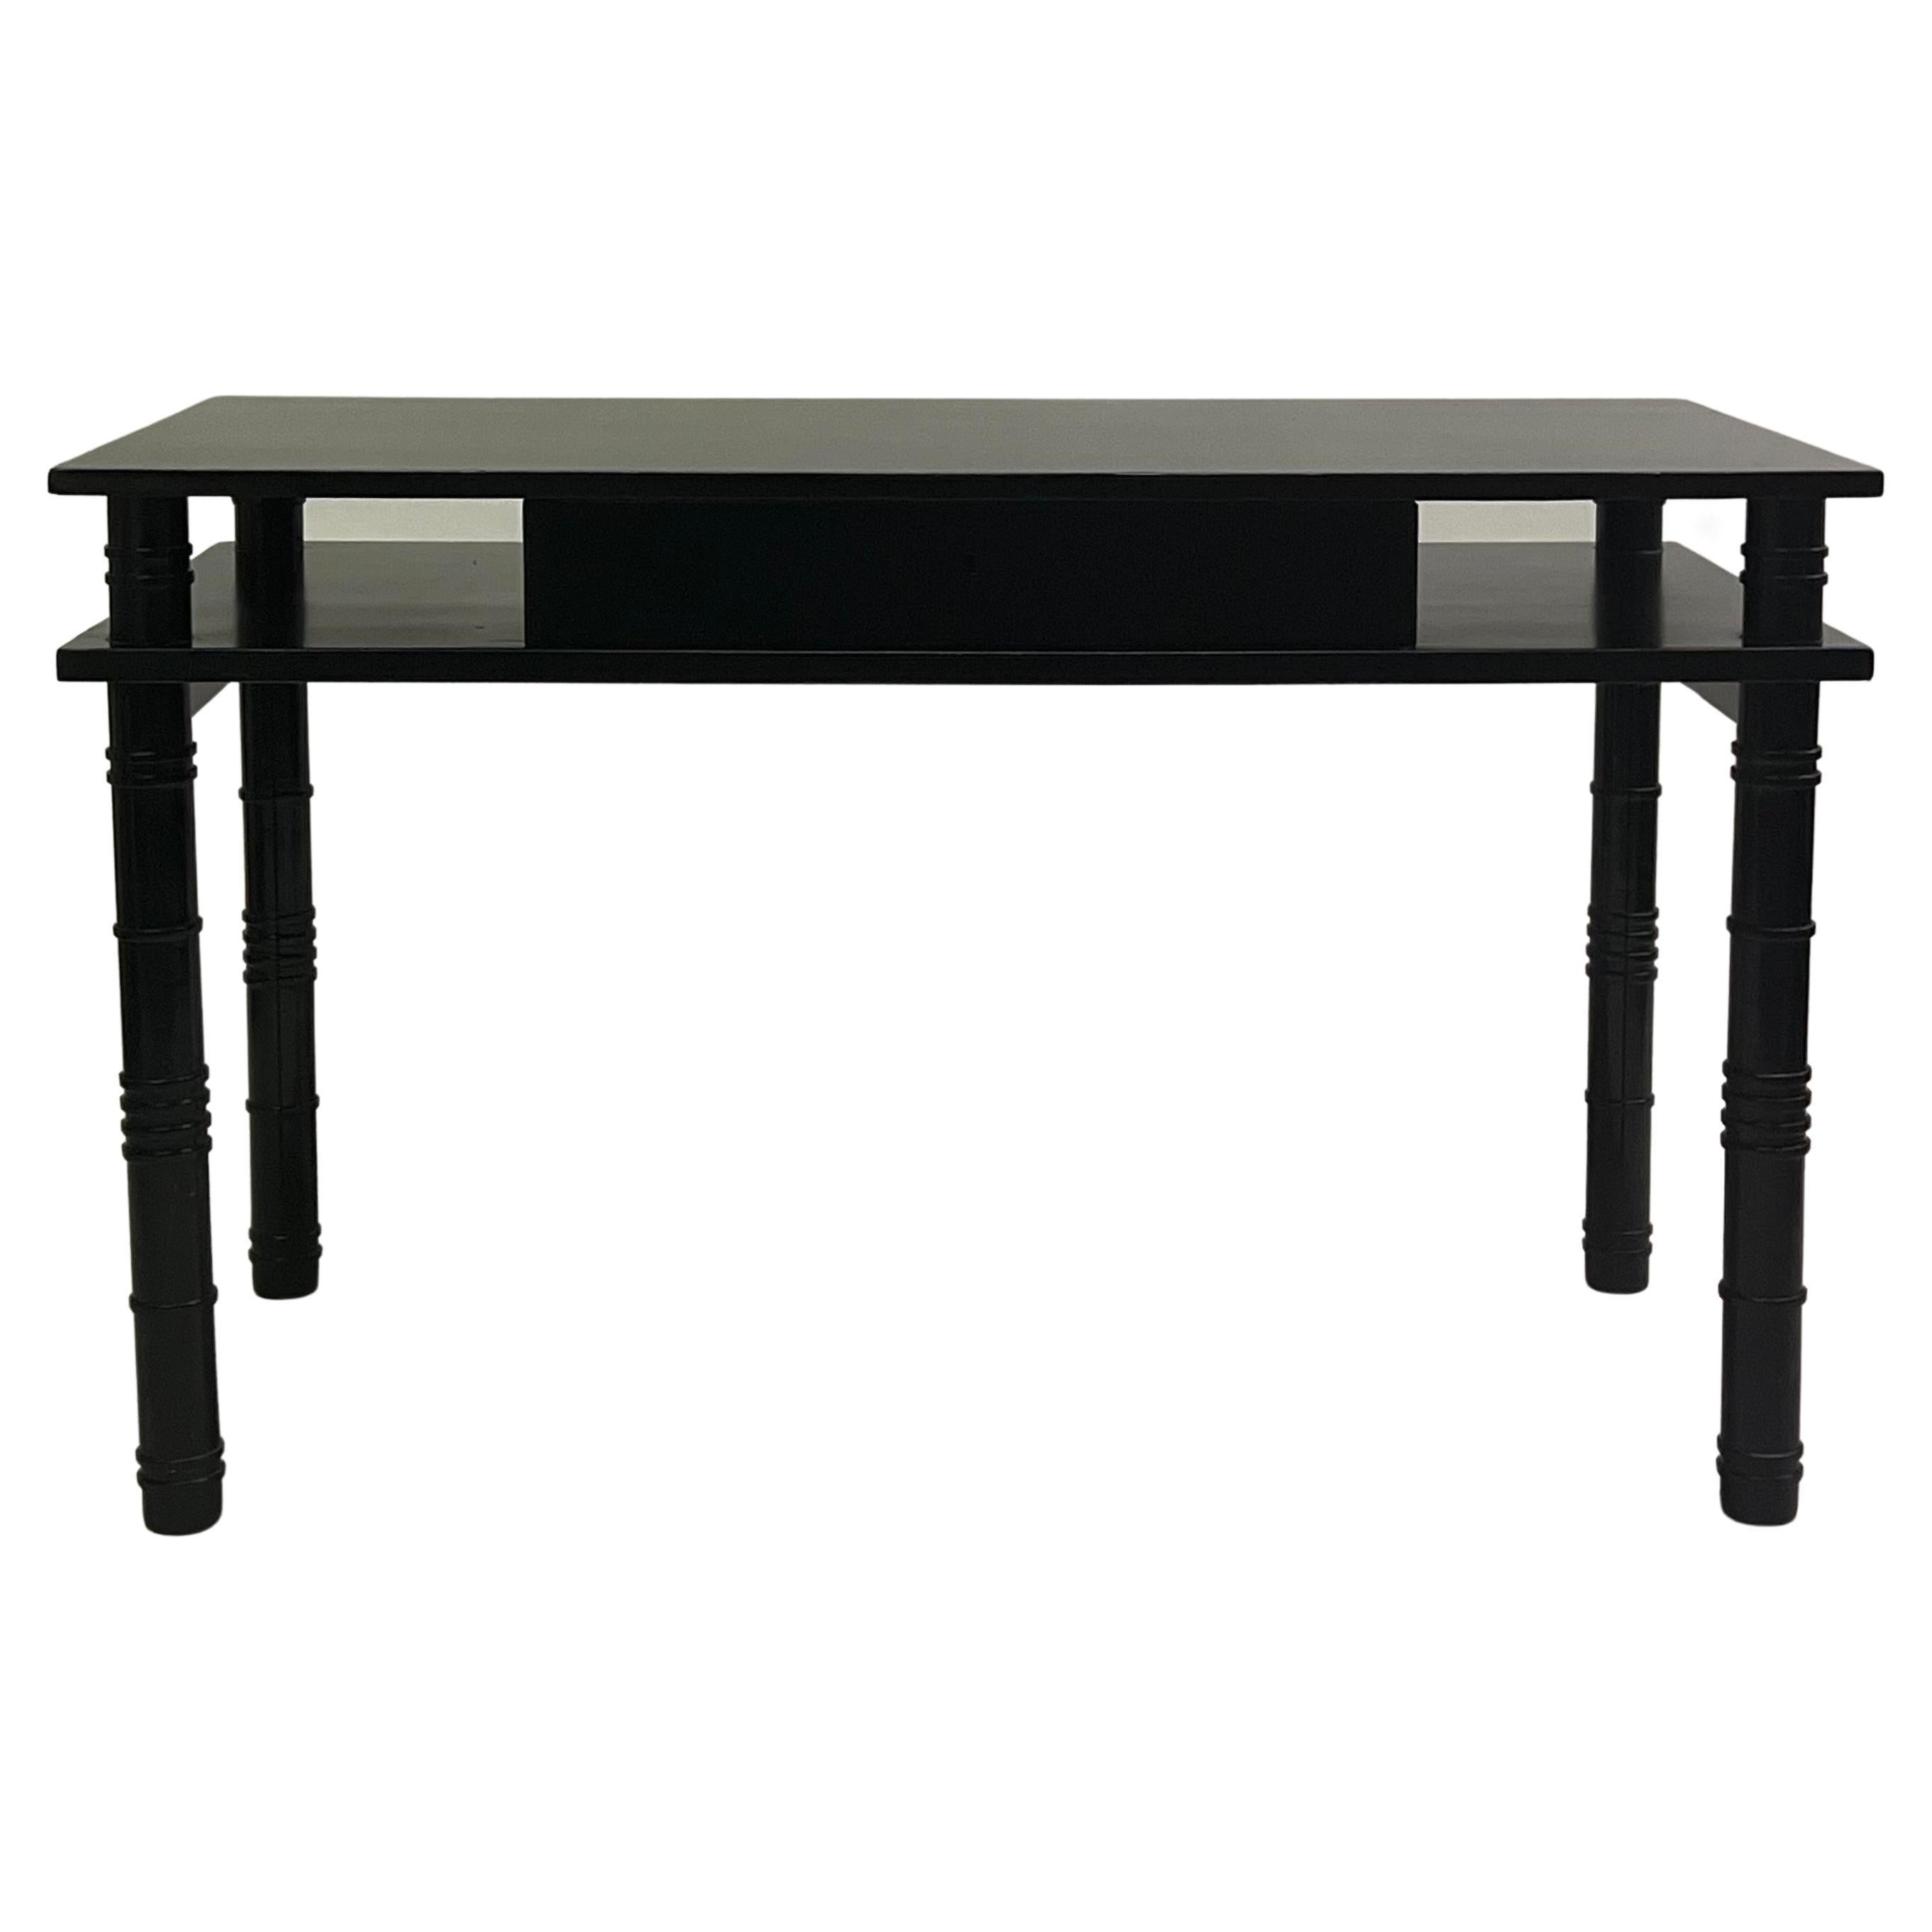 French MidCentury Modern Neoclassical Ebonized Sycamore Desk by Leon Jallot 1936 For Sale